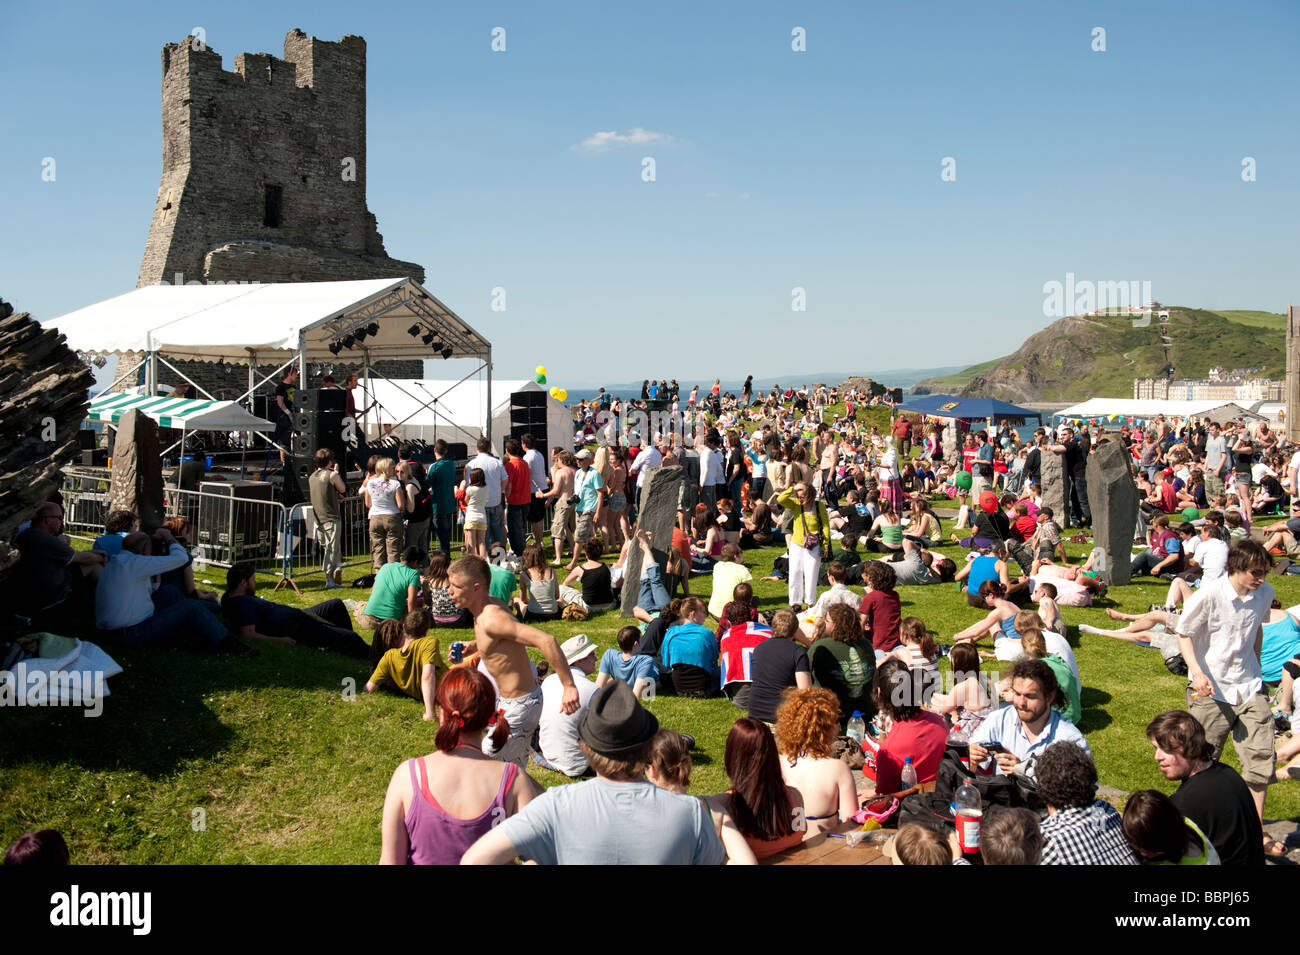 crowds of people at Roc y Castell Castle Rock free music festival Aberystwyth Wales UK 30 May 2009 Stock Photo